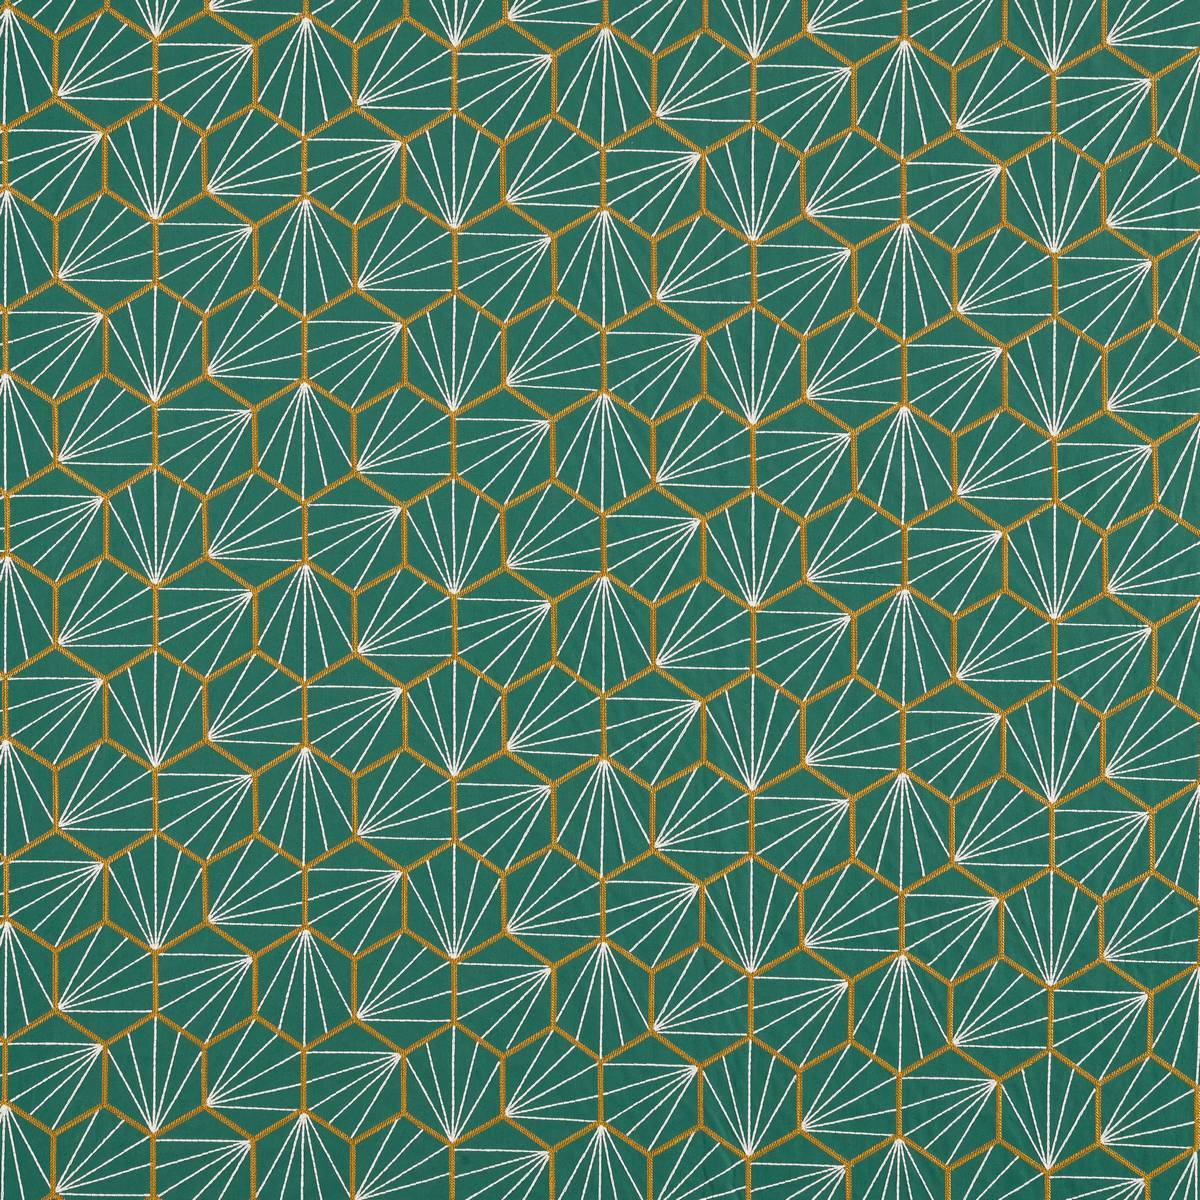 Aikyo Forest Fabric by Scion